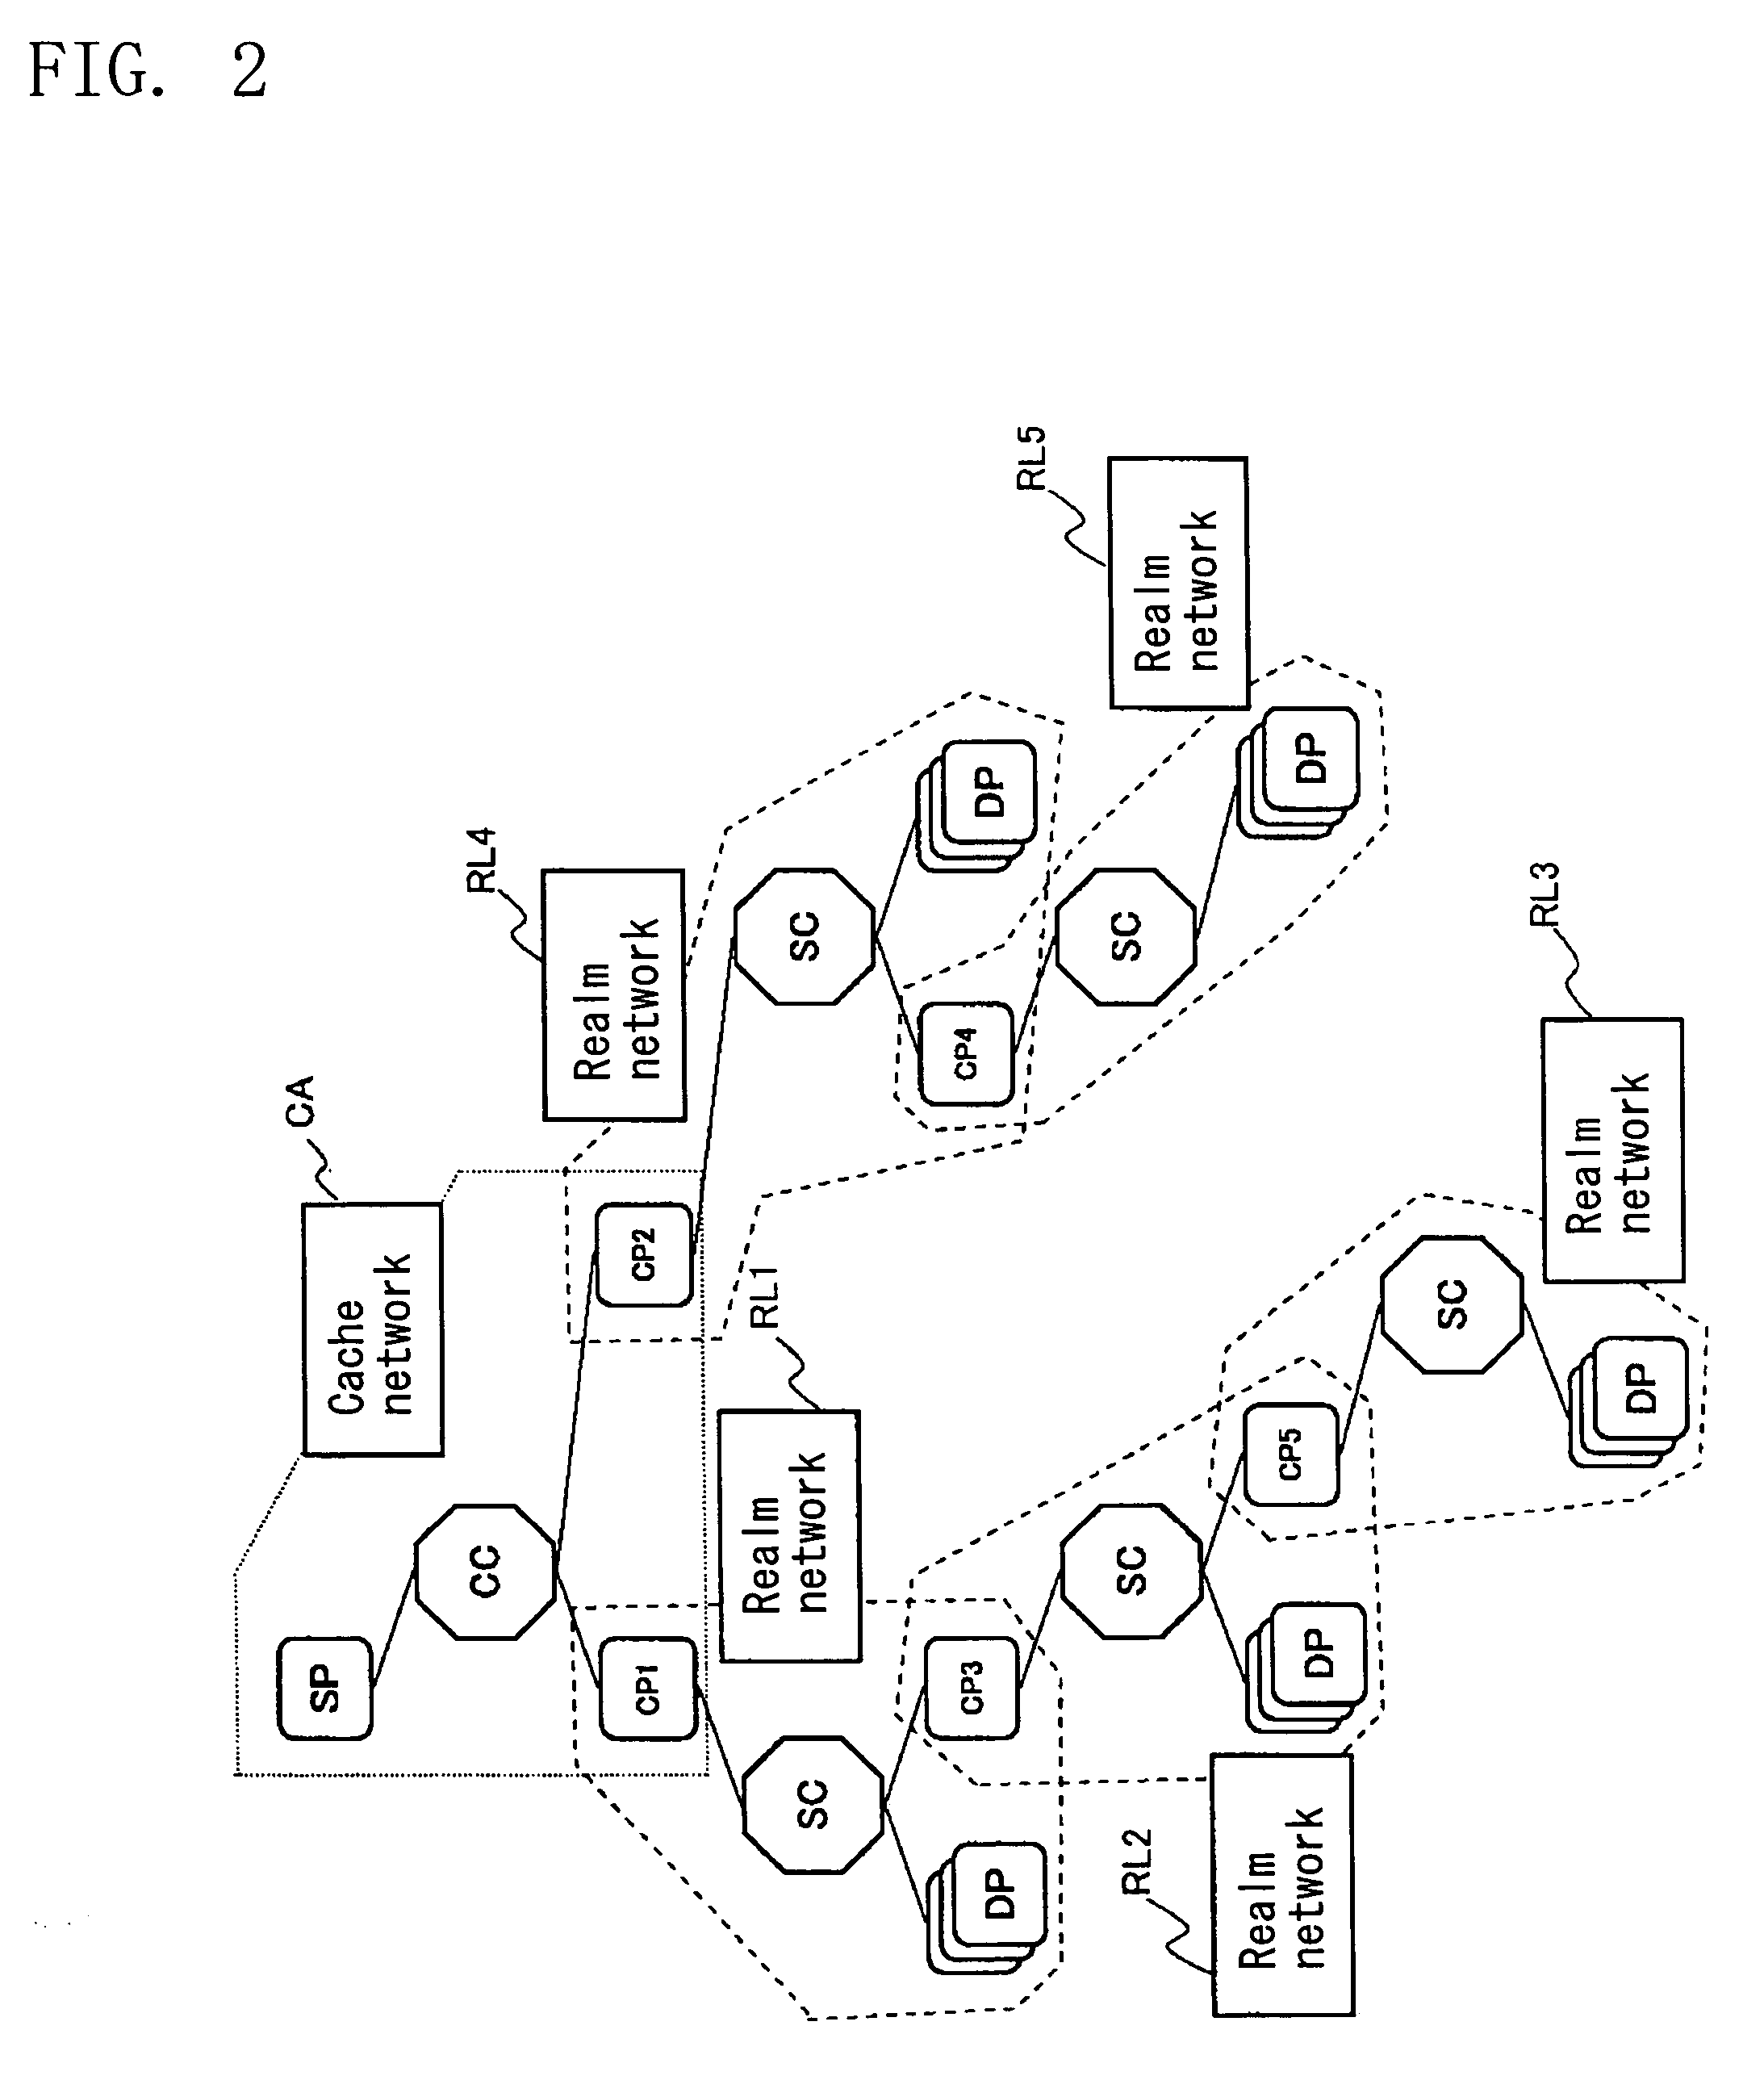 Peer-to-peer content distribution system